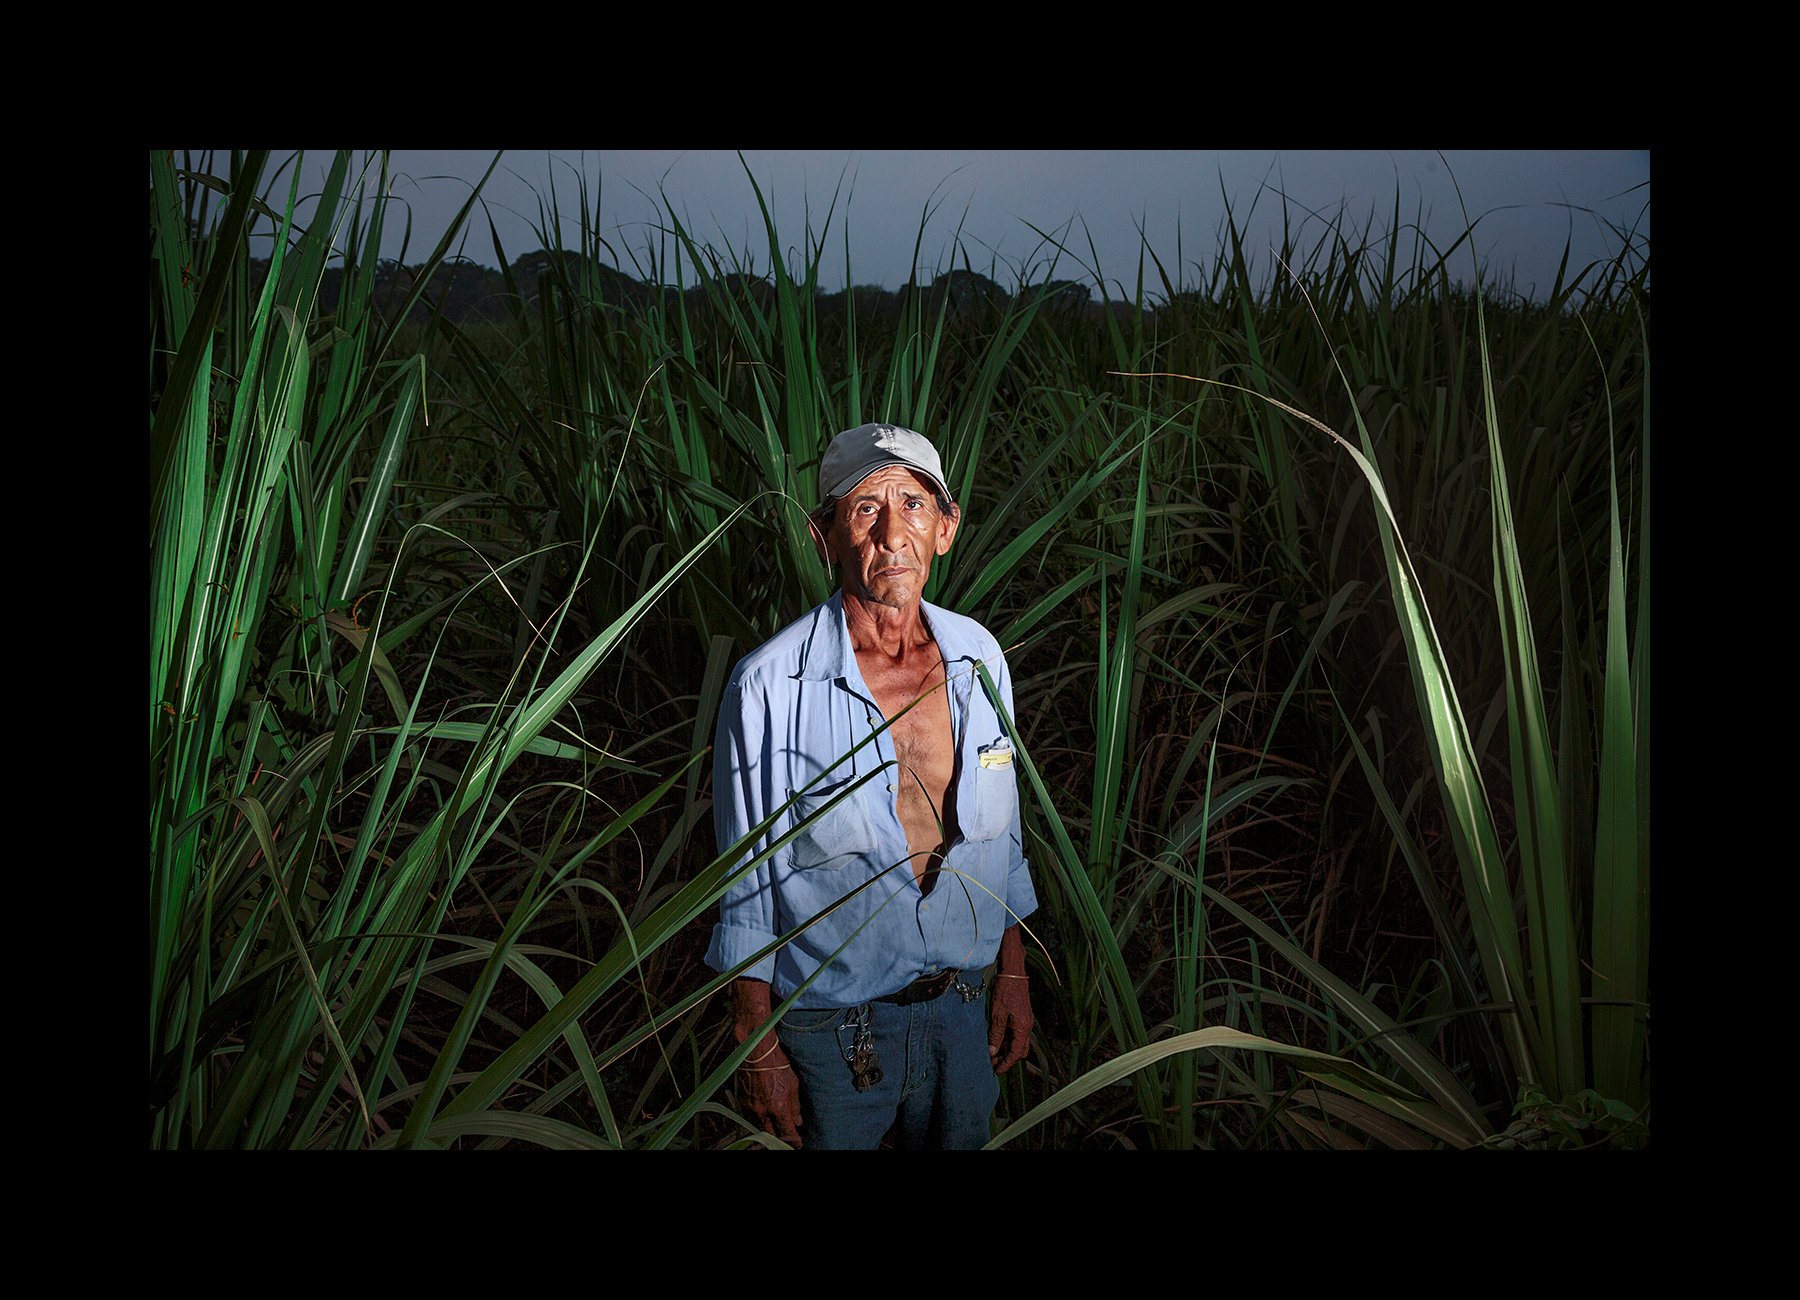  A former sugar cane worker, 67, photographed in the sugar cane fields where he worked for 25 years, in Chichigalpa, Nicaragua on April 25, 2014. He is currently sick with CKDnT after years of toiling without protection from heat stress and dehydrati